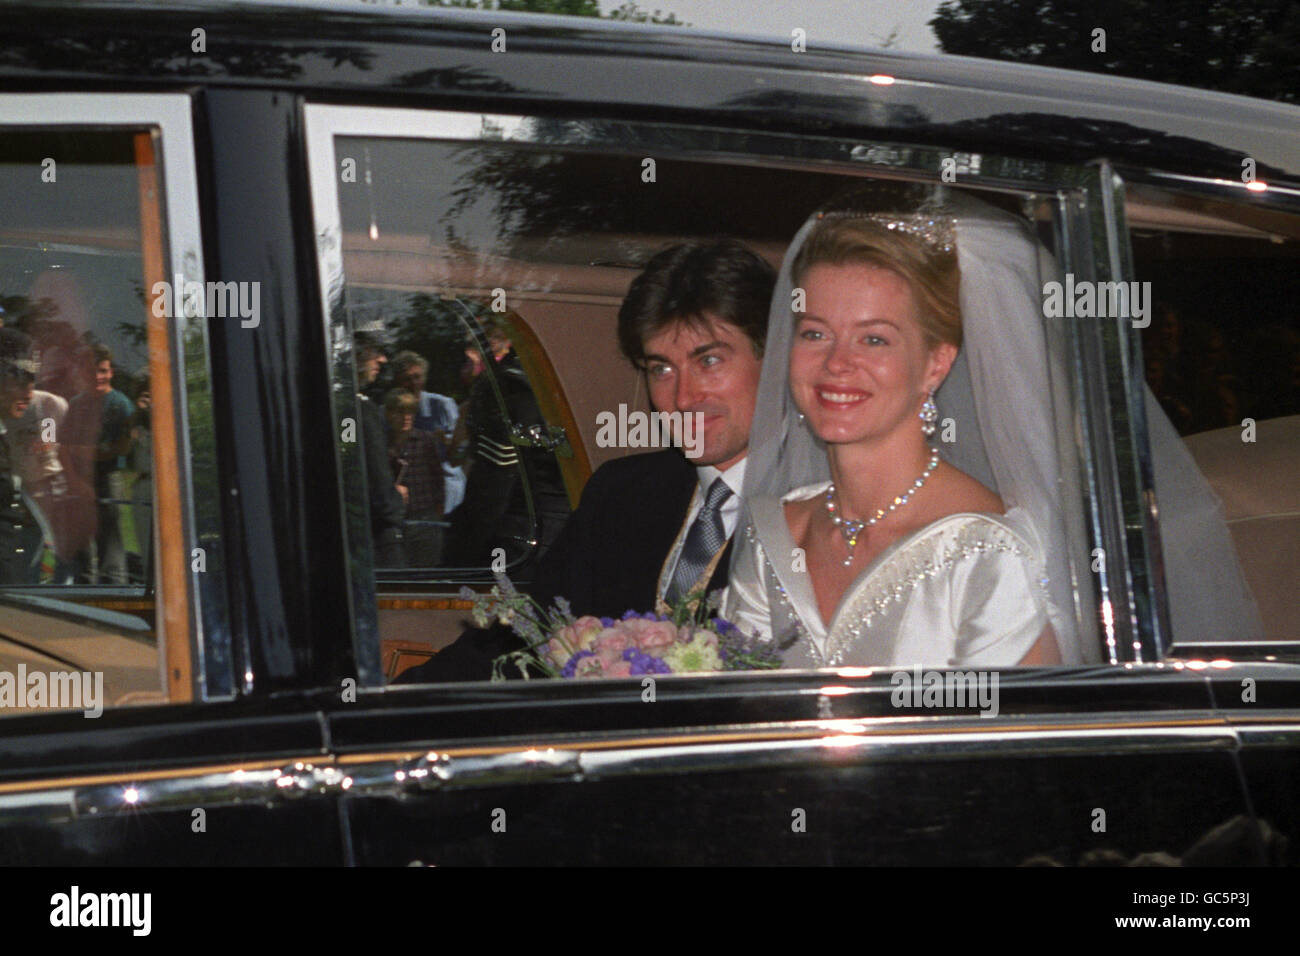 Royalty - Wedding of Lady Helen Windsor and Tim Taylor Stock Photo